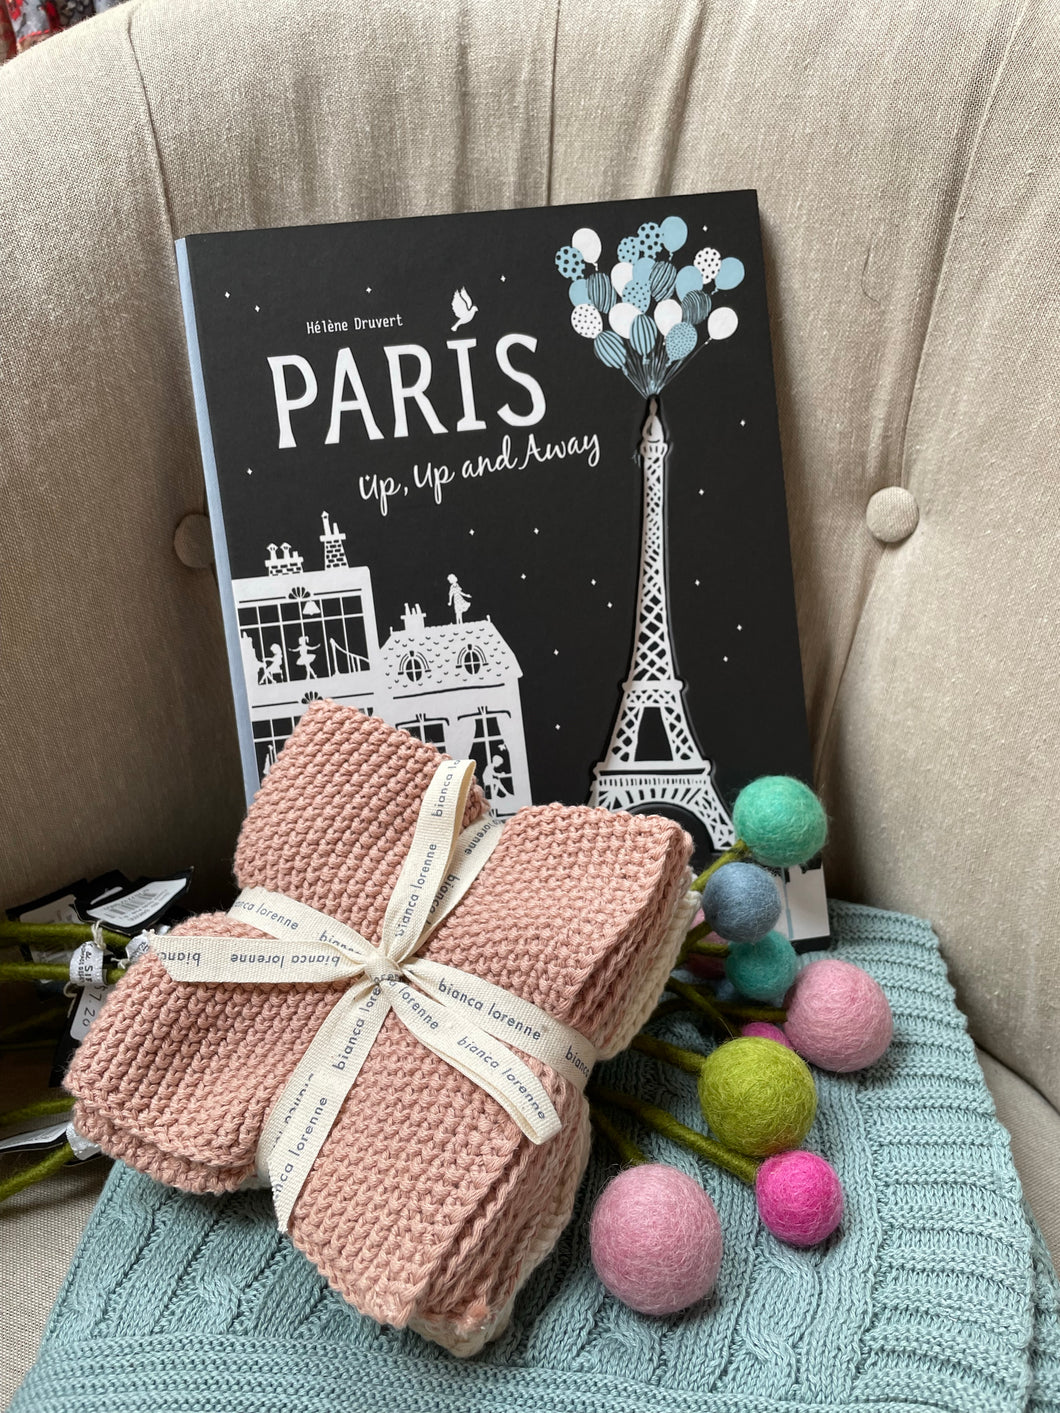 Paris Up, Up and Away by Helene Druvert